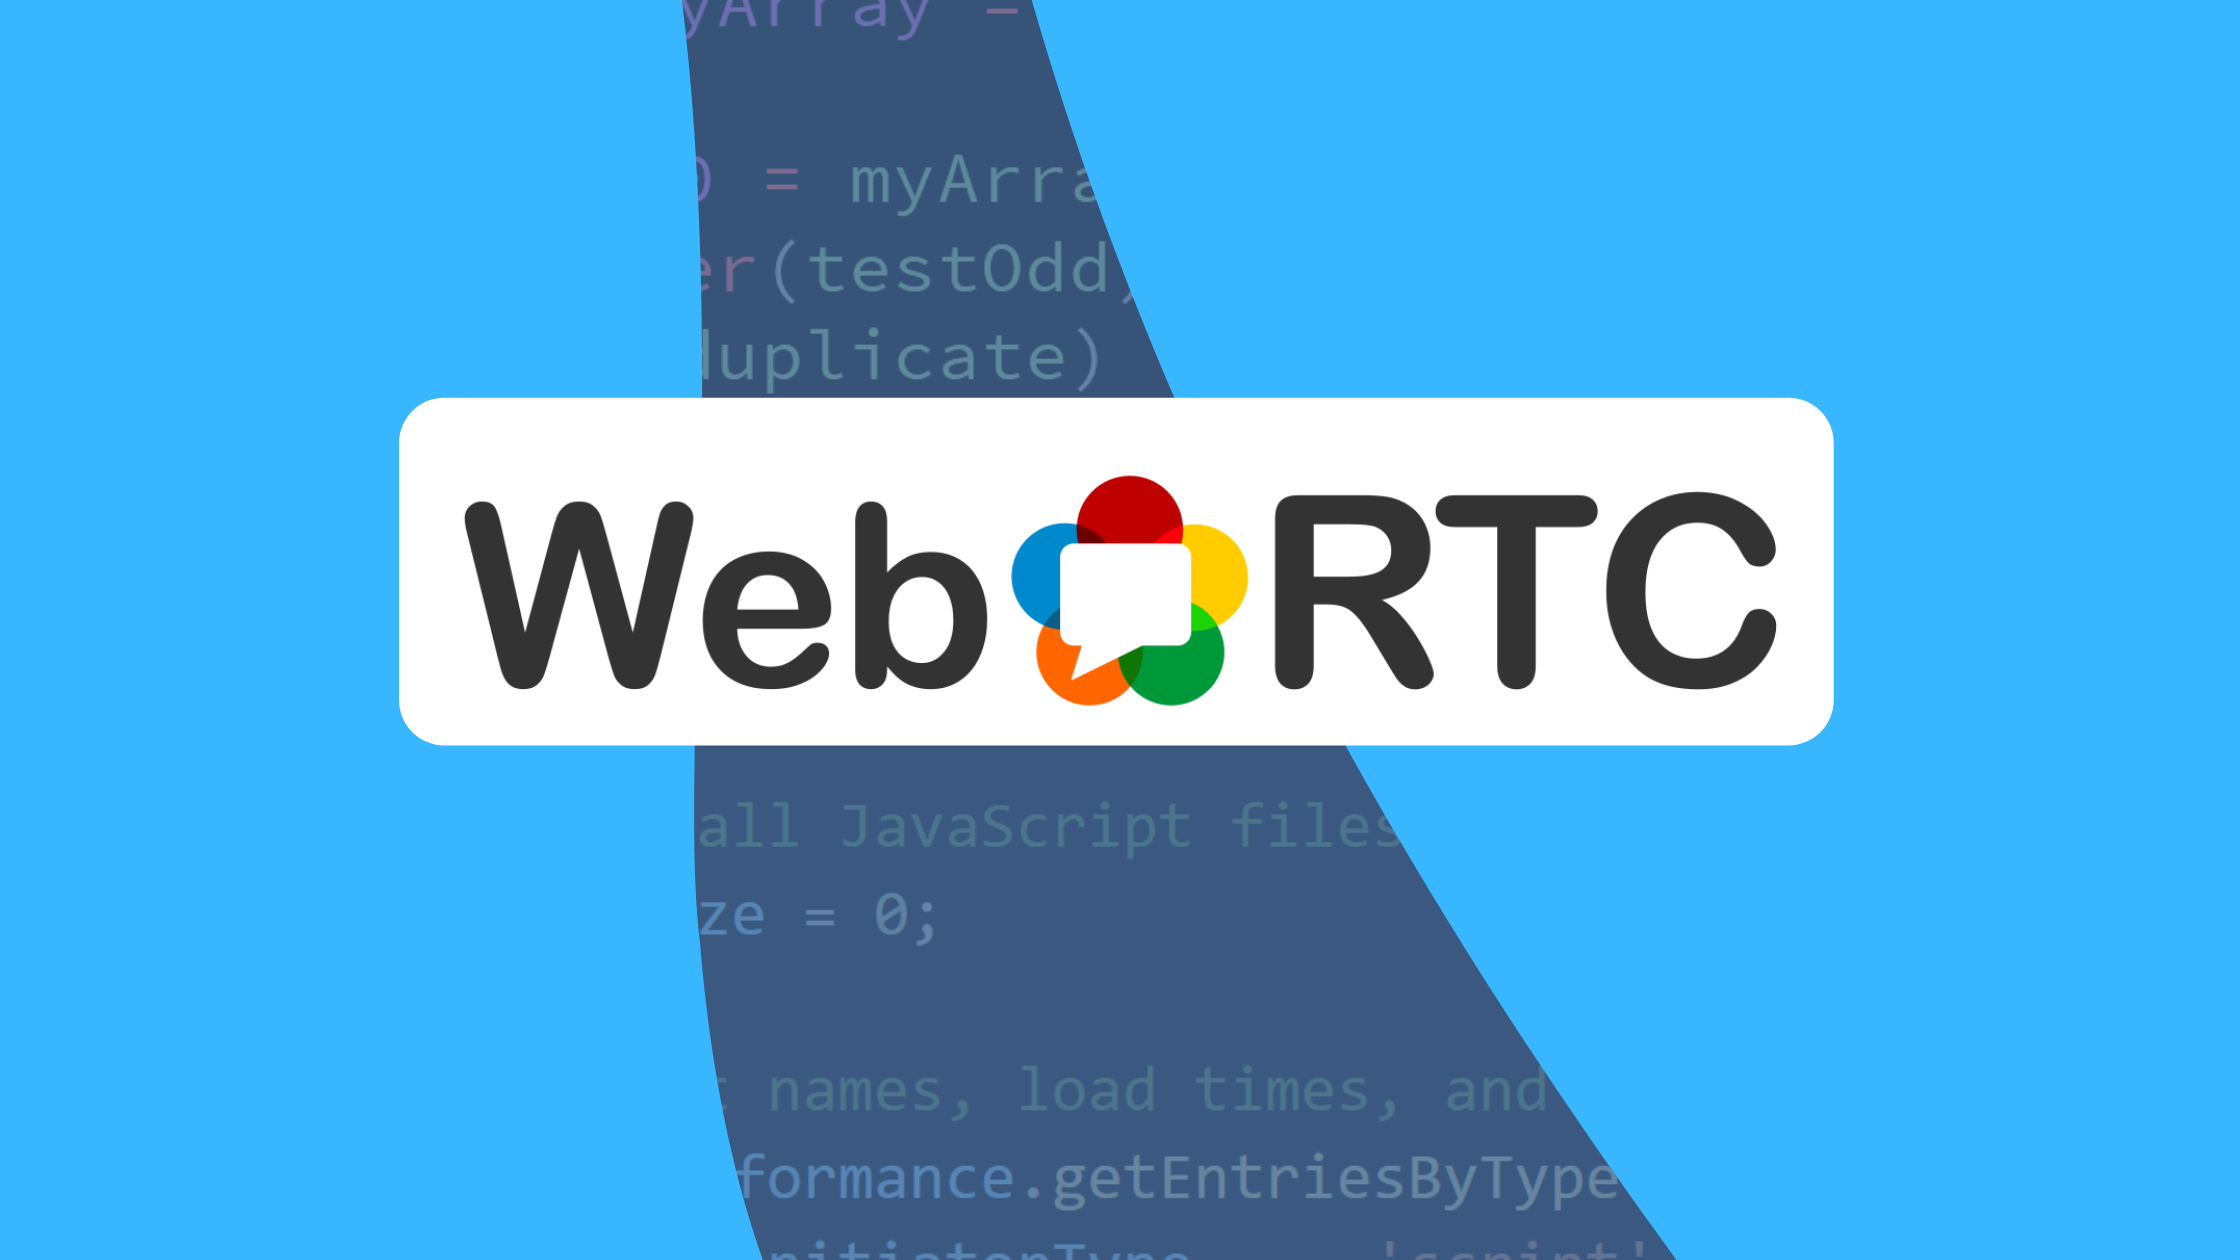 Everything You Ever Wanted to Know About WebRTC